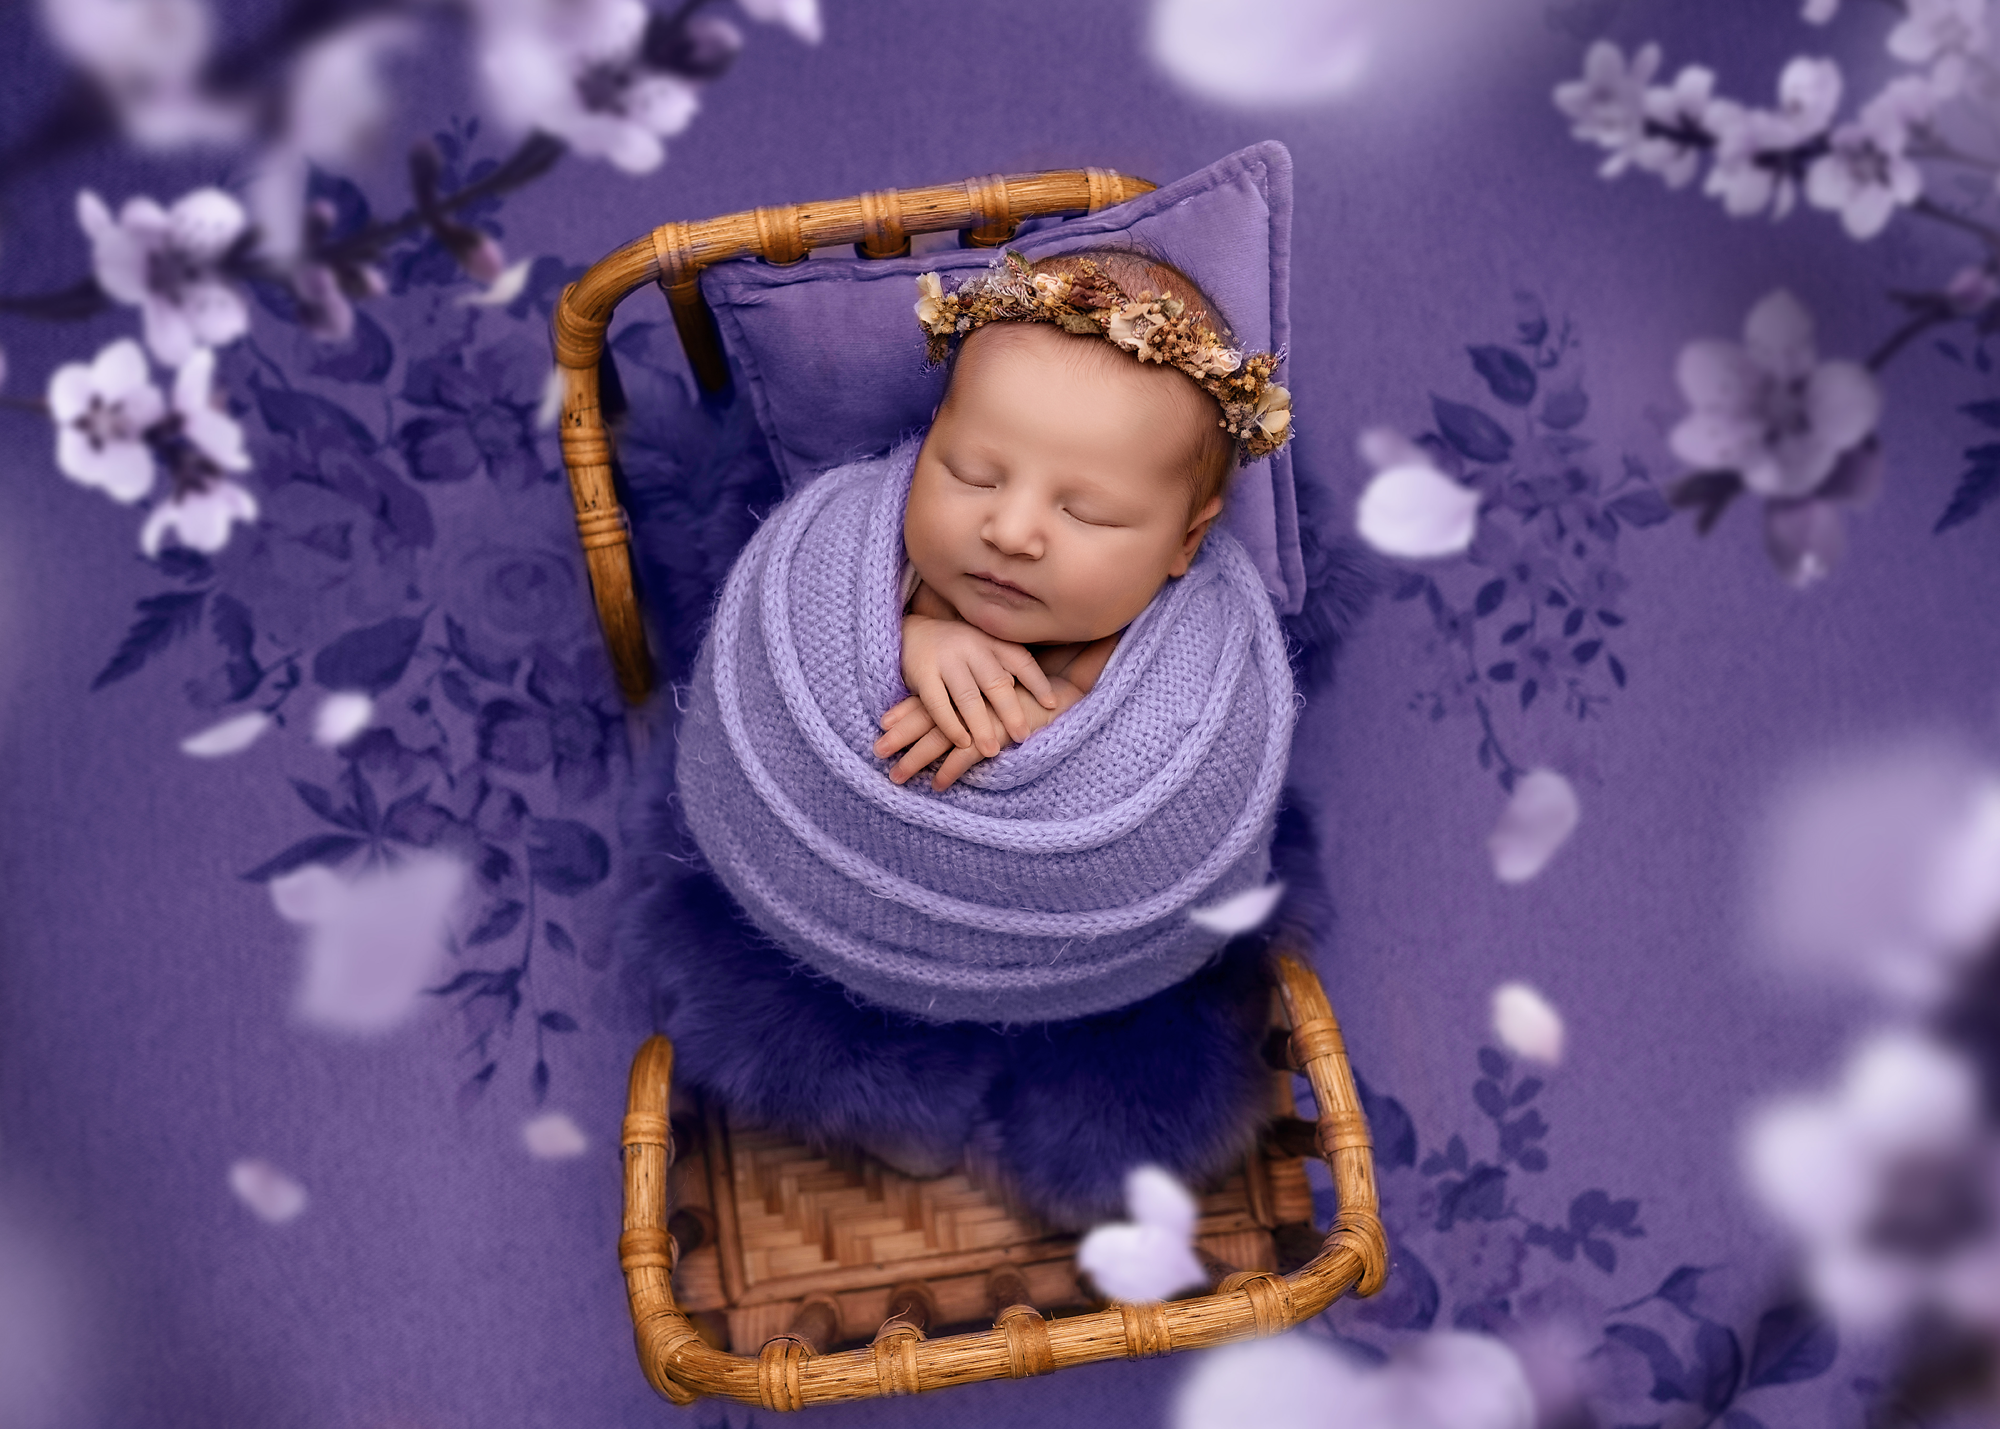 newborn baby wrapped in purple knitted wrap with flowers